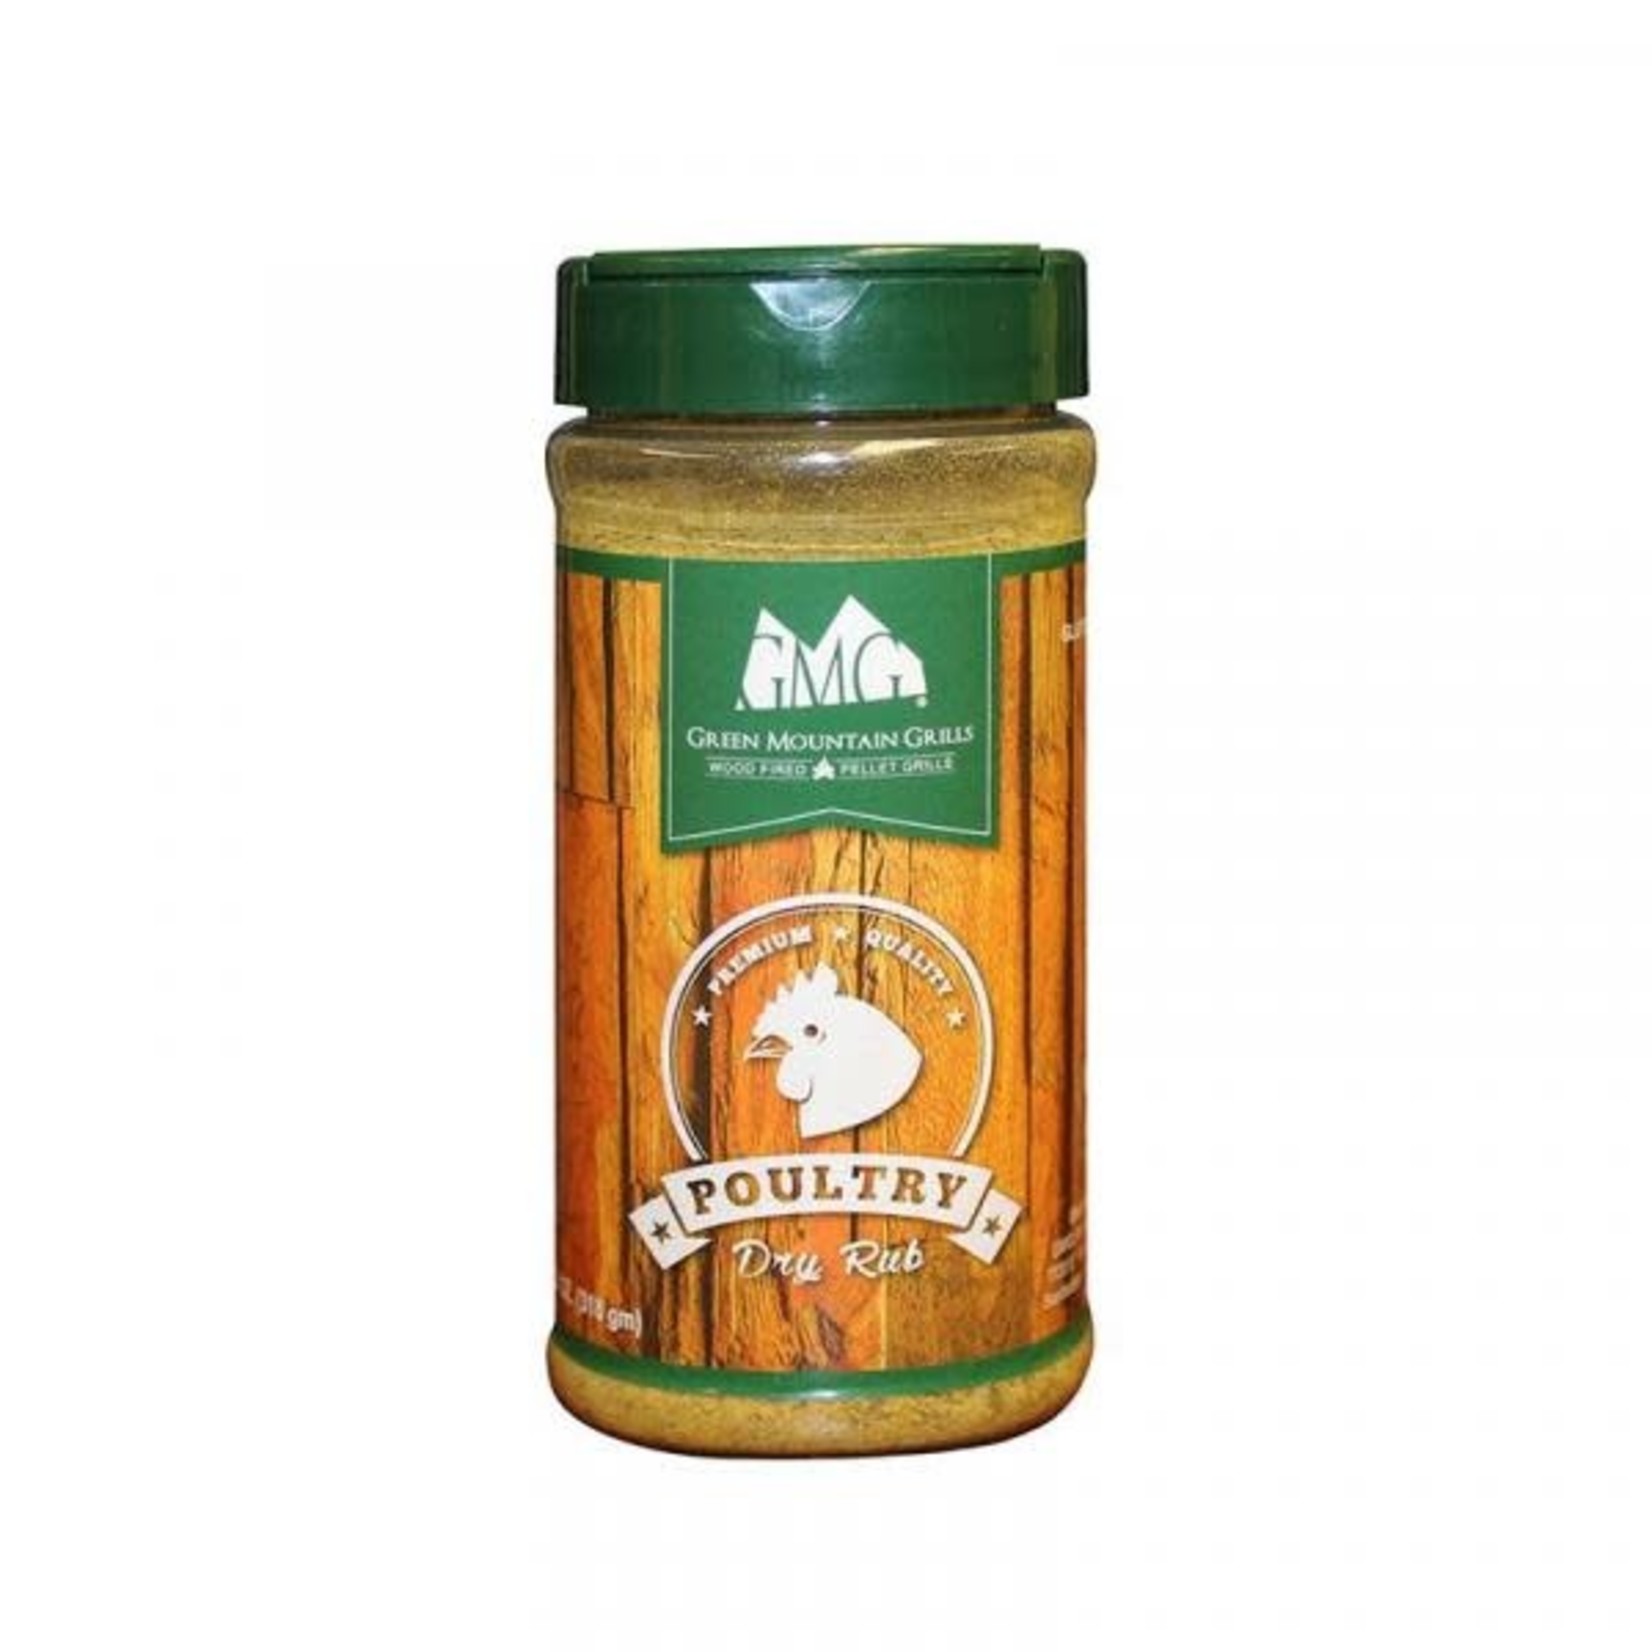 GMG GMG DRY RUB (POULTRY) GMG Poultry Dry Rub on your chicken, turkey, pheasant, and more